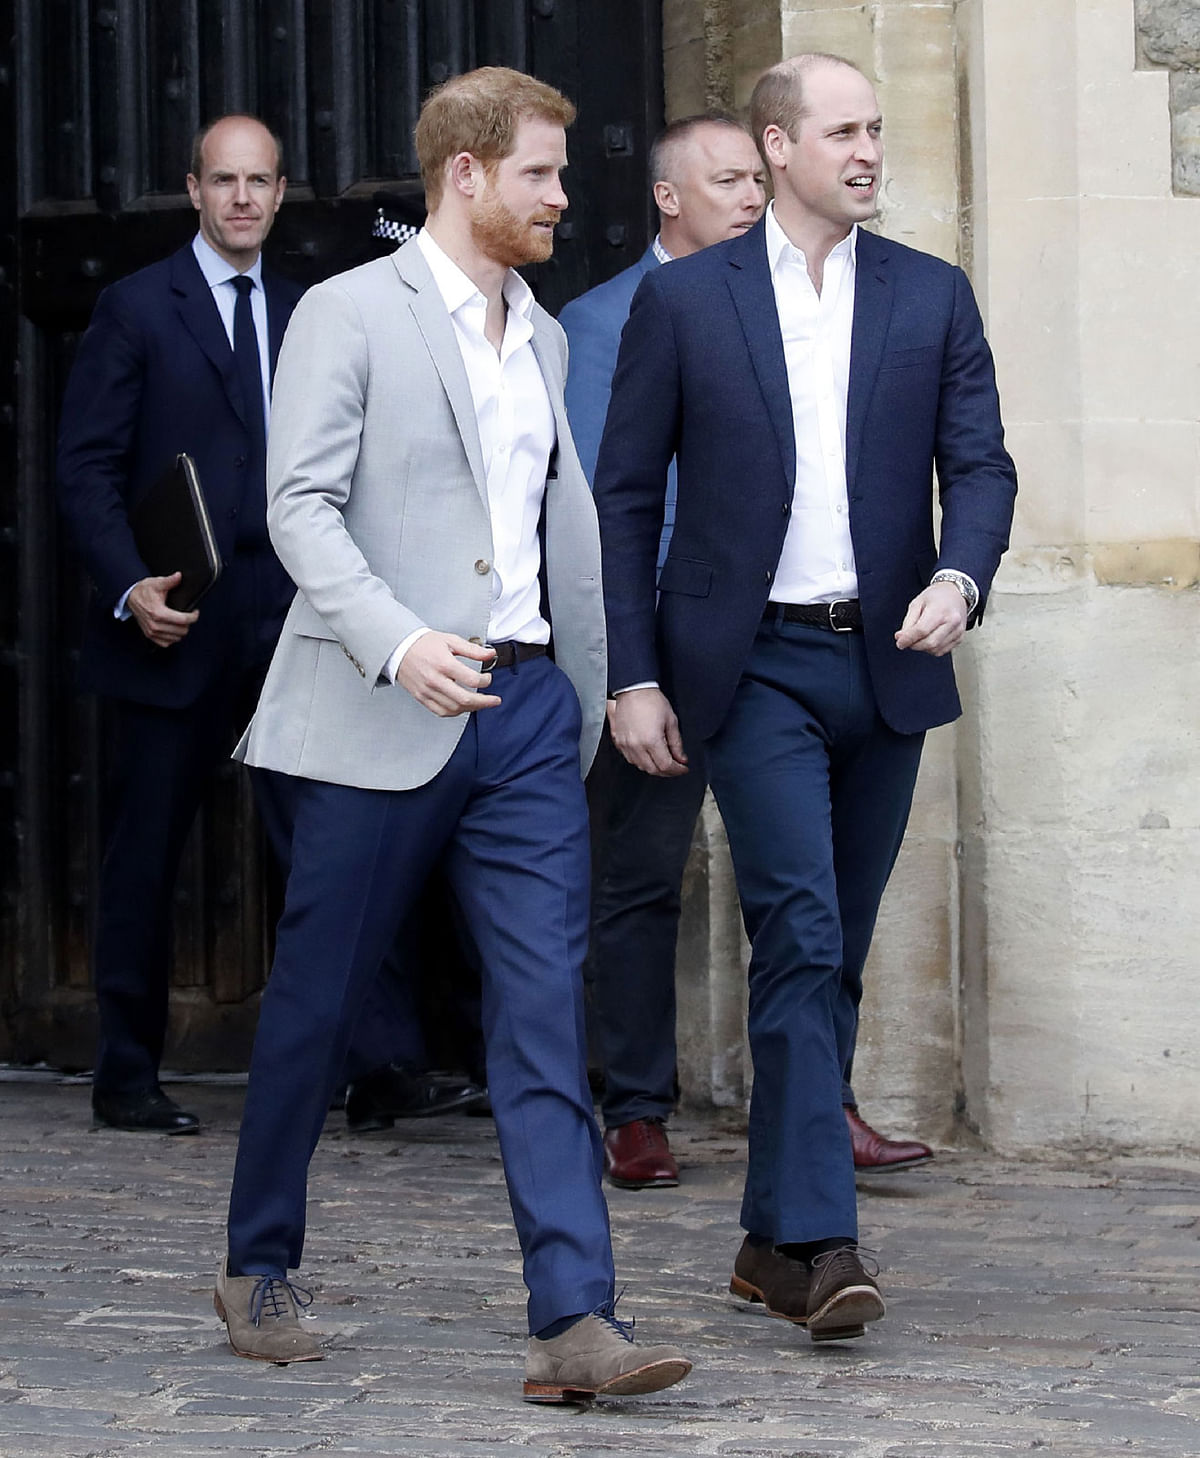 Britain`s prince Harry (L) and his best man prince William, Duke of Cambridge arrive to greet well-wishers on the street outside Windsor Castle in Windsor on 18 May 2018, the eve of prince Harry`s royal wedding to US actress Meghan Markle. Britain`s prince Harry and US actress Meghan Markle will marry on 19 May at St George`s Chapel in Windsor Castle. Photo: AFP